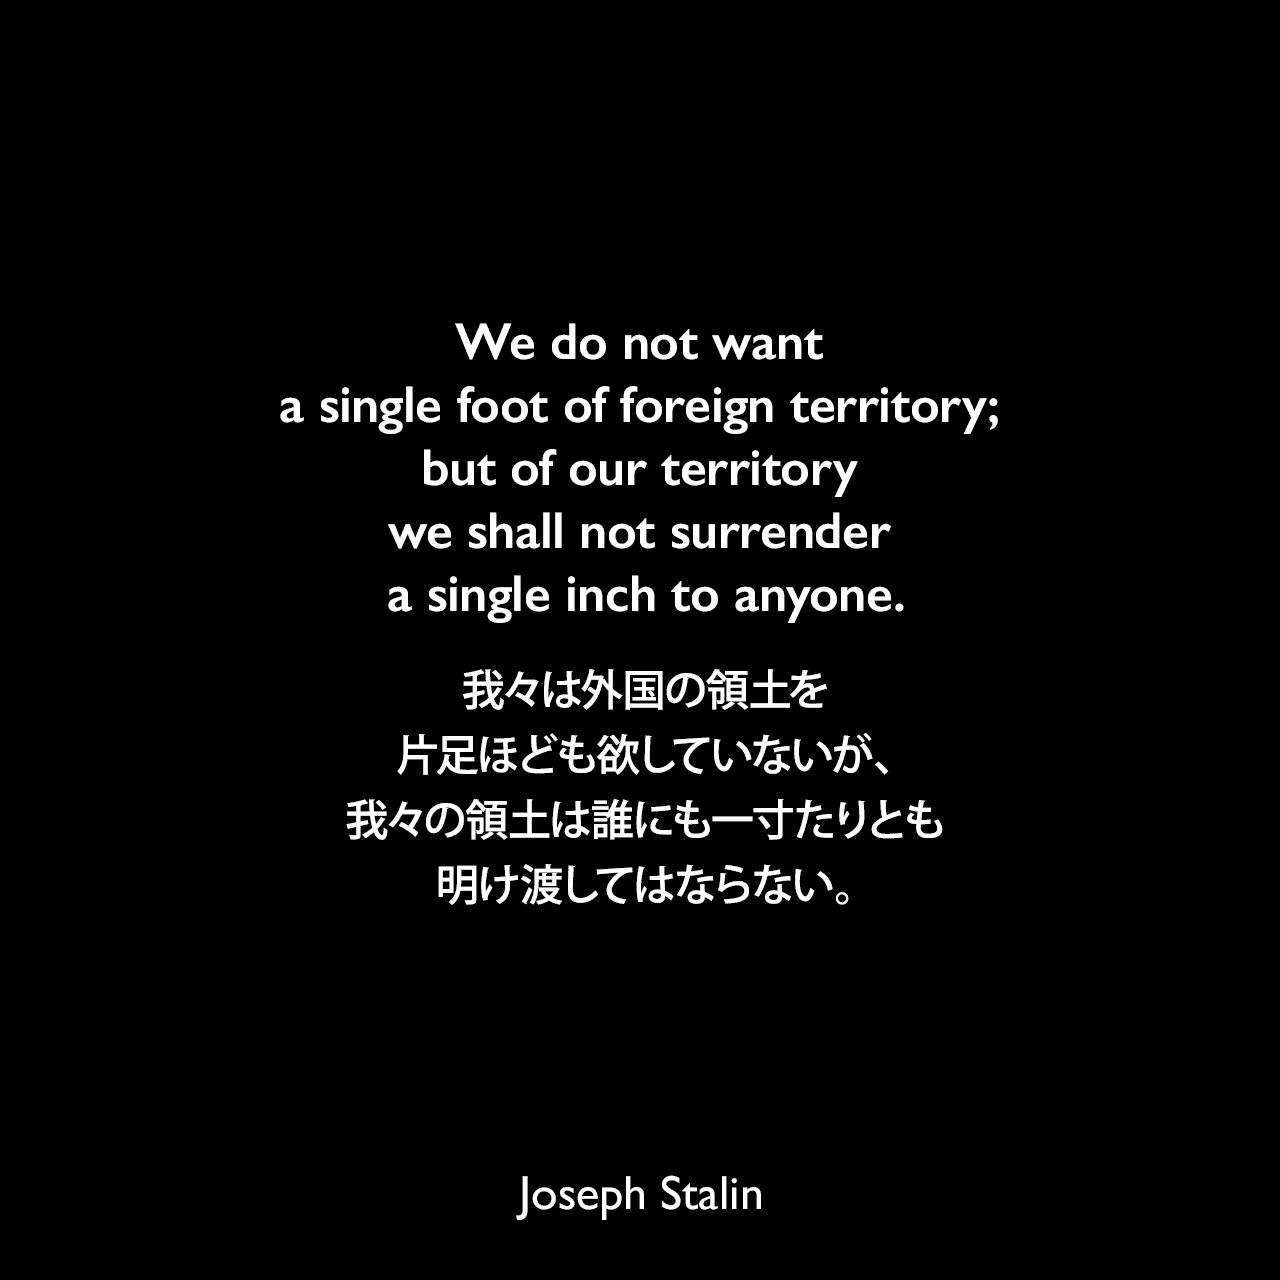 We do not want a single foot of foreign territory; but of our territory we shall not surrender a single inch to anyone.我々は外国の領土を片足ほども欲していないが、我々の領土は誰にも一寸たりとも明け渡してはならない。- 1930年6月29日 ソビエト連邦中央委員会の政治報告よりJoseph Stalin